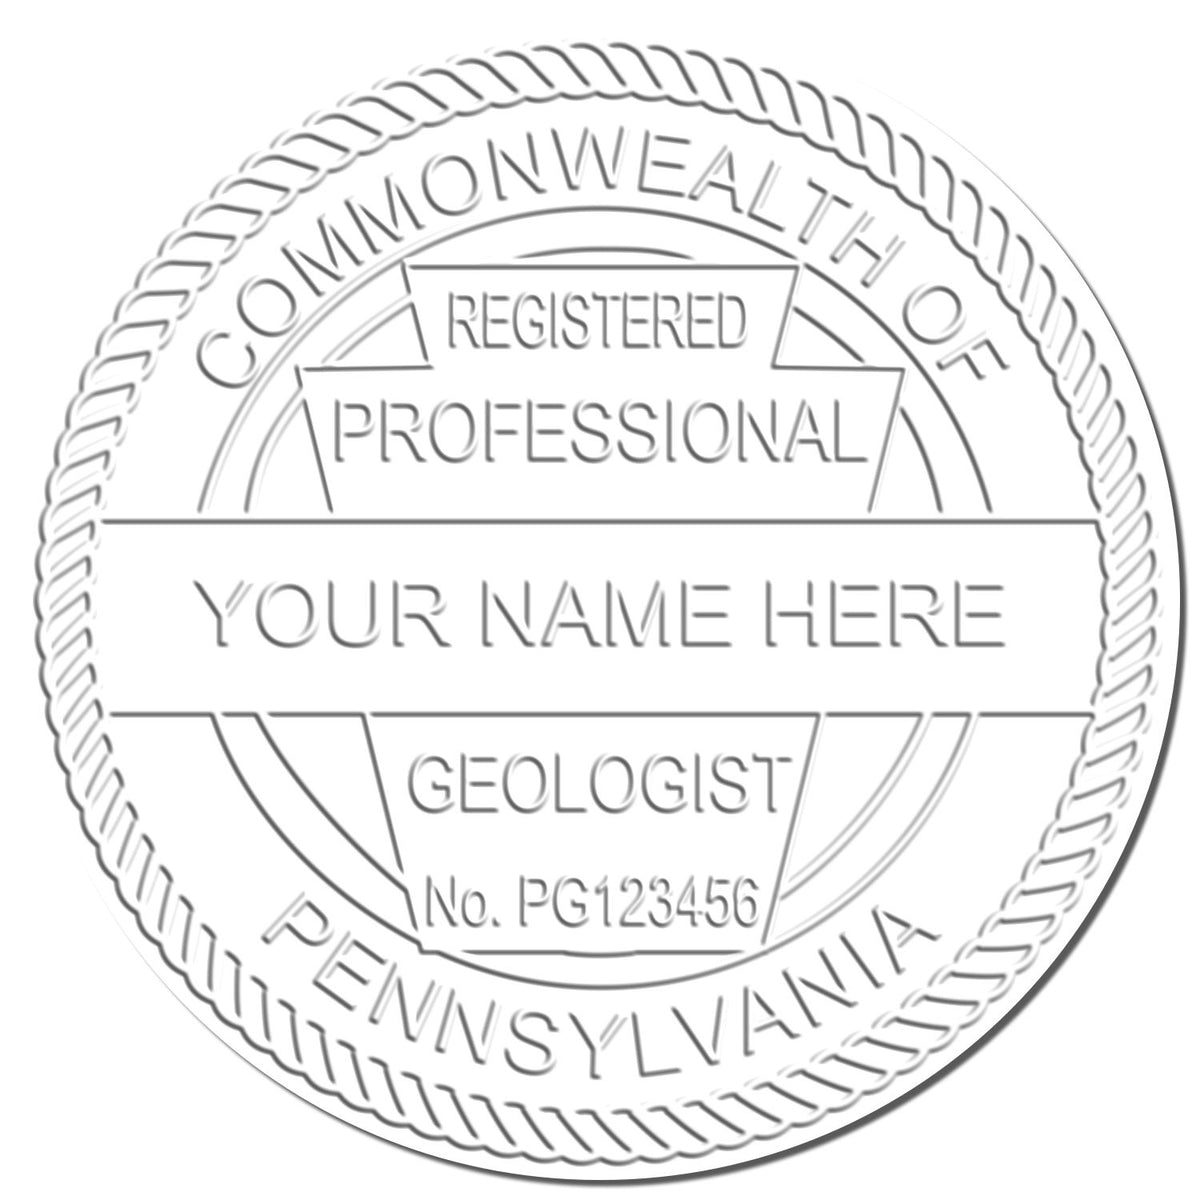 This paper is stamped with a sample imprint of the Handheld Pennsylvania Professional Geologist Embosser, signifying its quality and reliability.